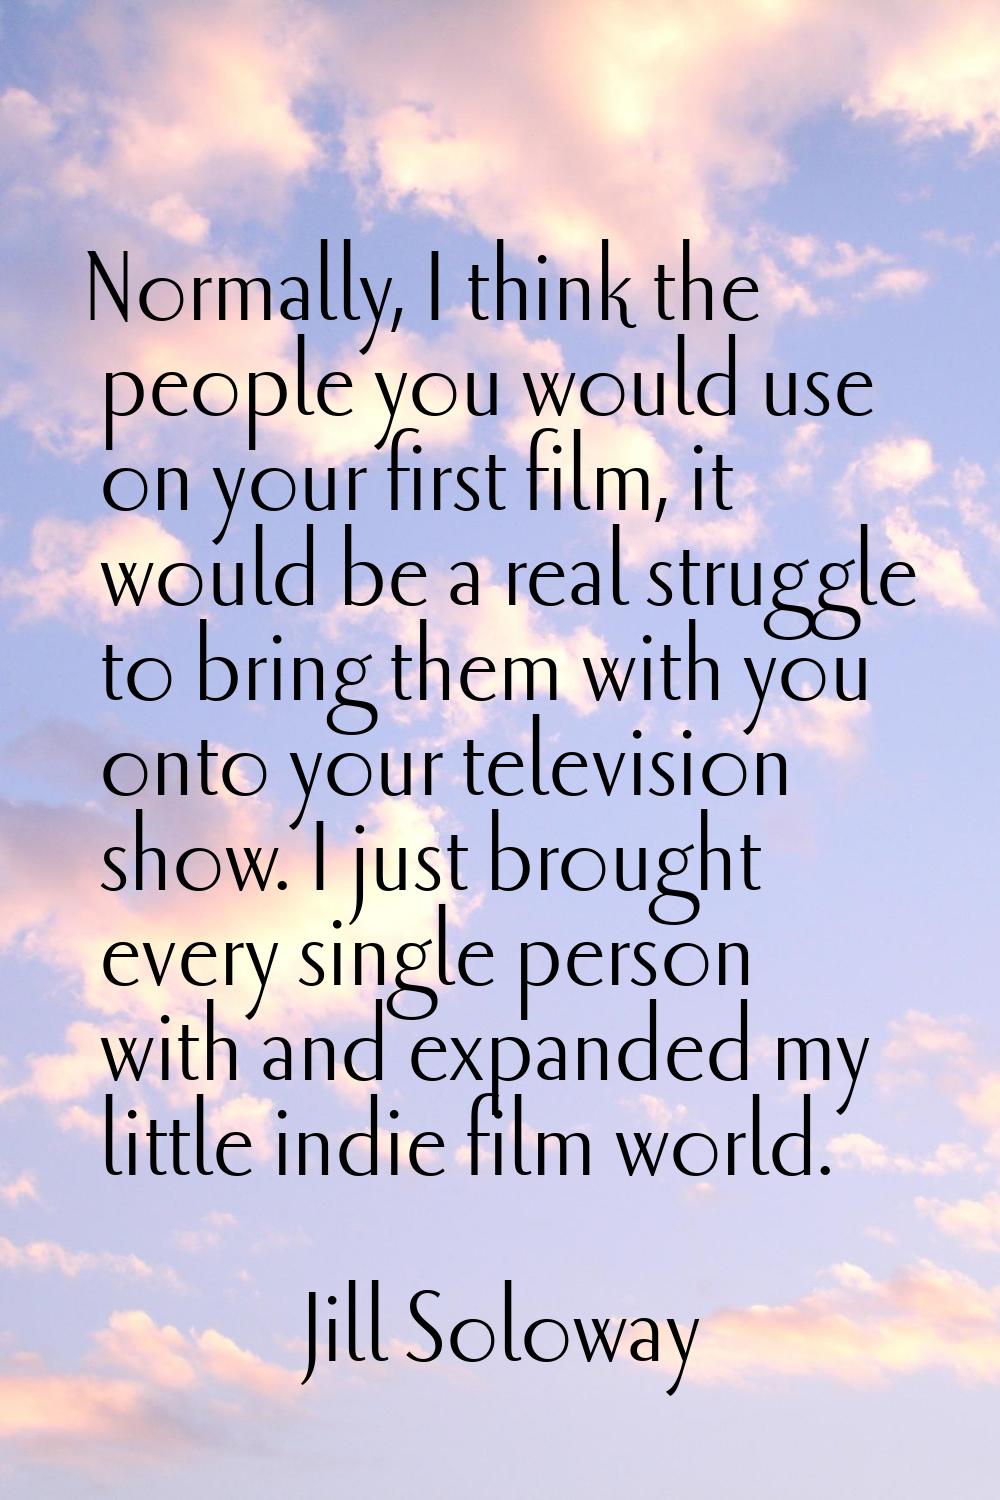 Normally, I think the people you would use on your first film, it would be a real struggle to bring